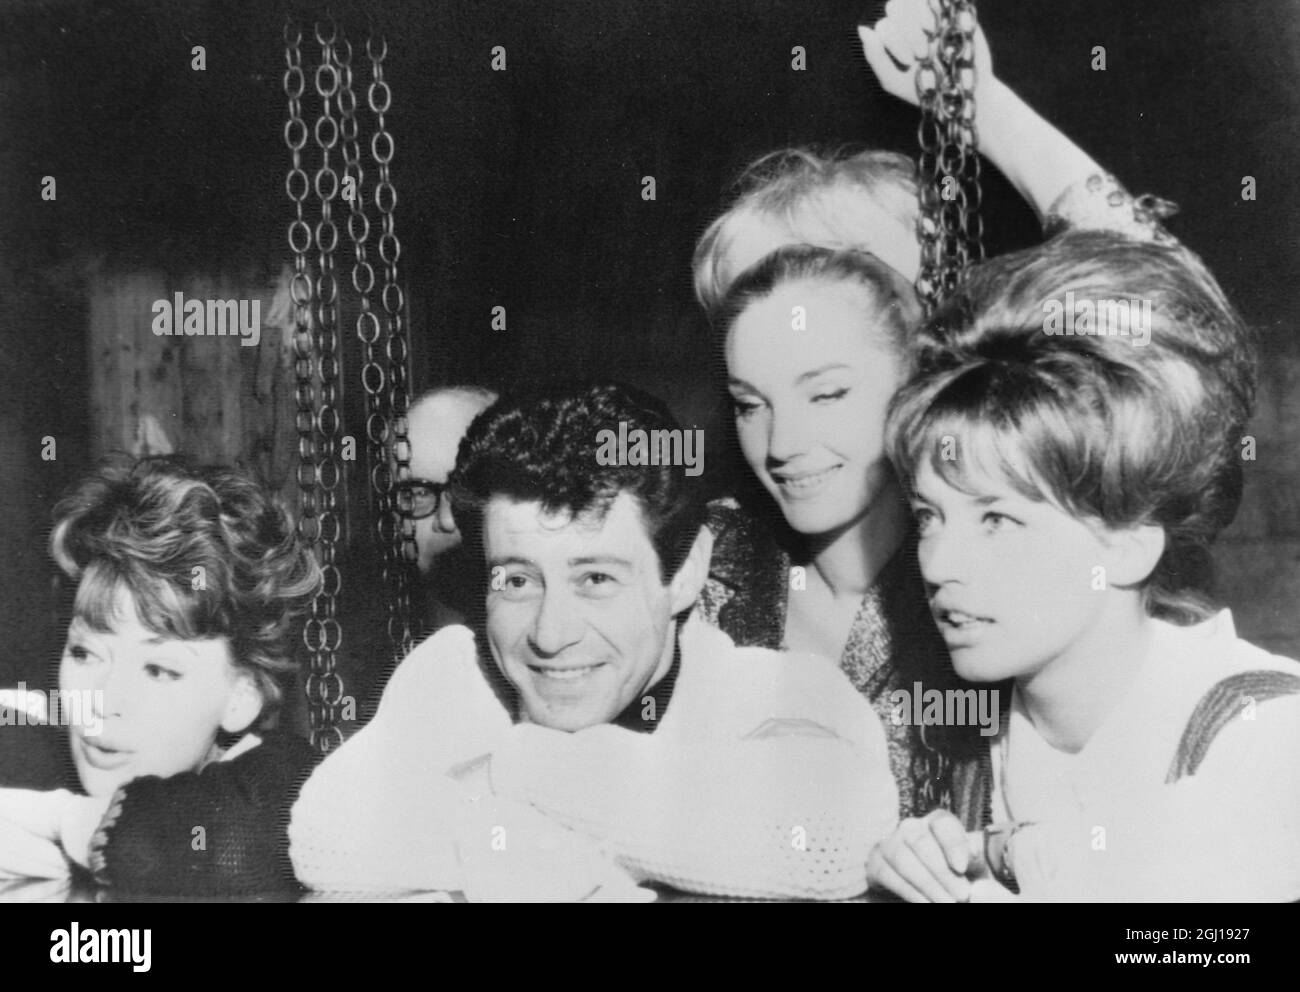 EDDIE FISHER AT WINTER OLYMPICS GAMES IN INNSBRUCK, AUSTRIA - ; 3 FEBRUARY 1964 Stock Photo